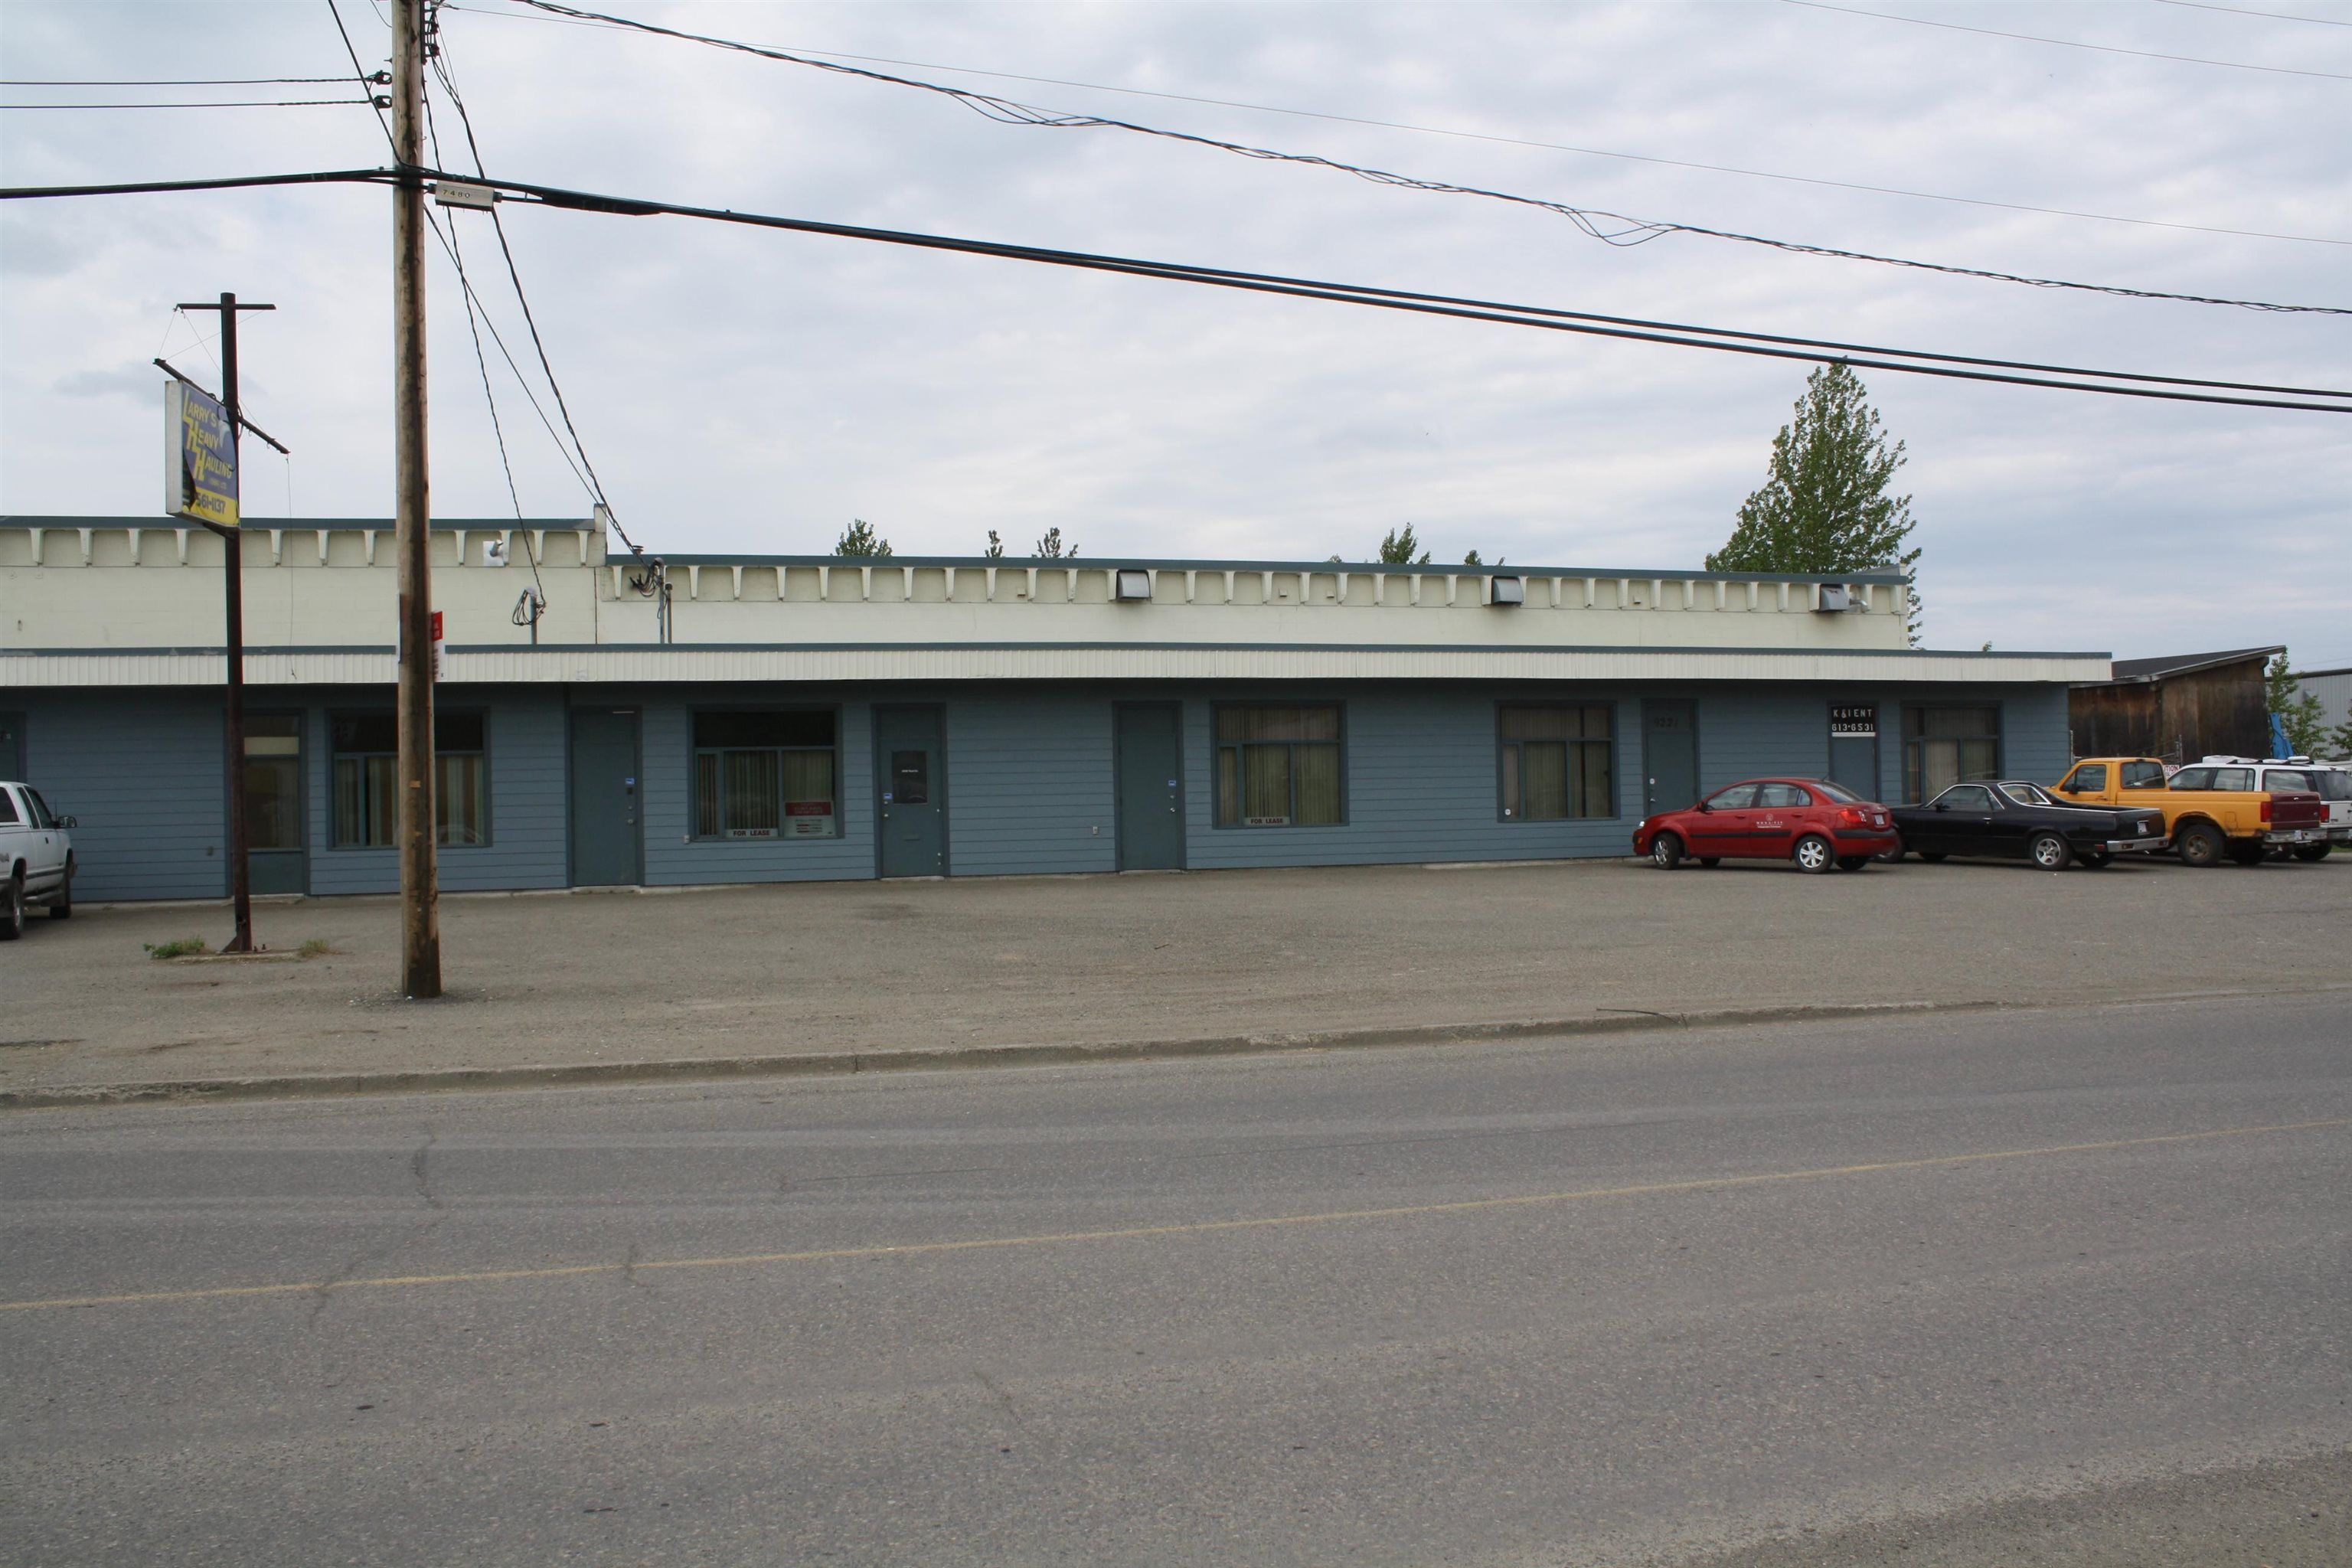 Main Photo: 9221 PENN Road in Prince George: Danson Industrial for lease (PG City South East)  : MLS®# C8046115